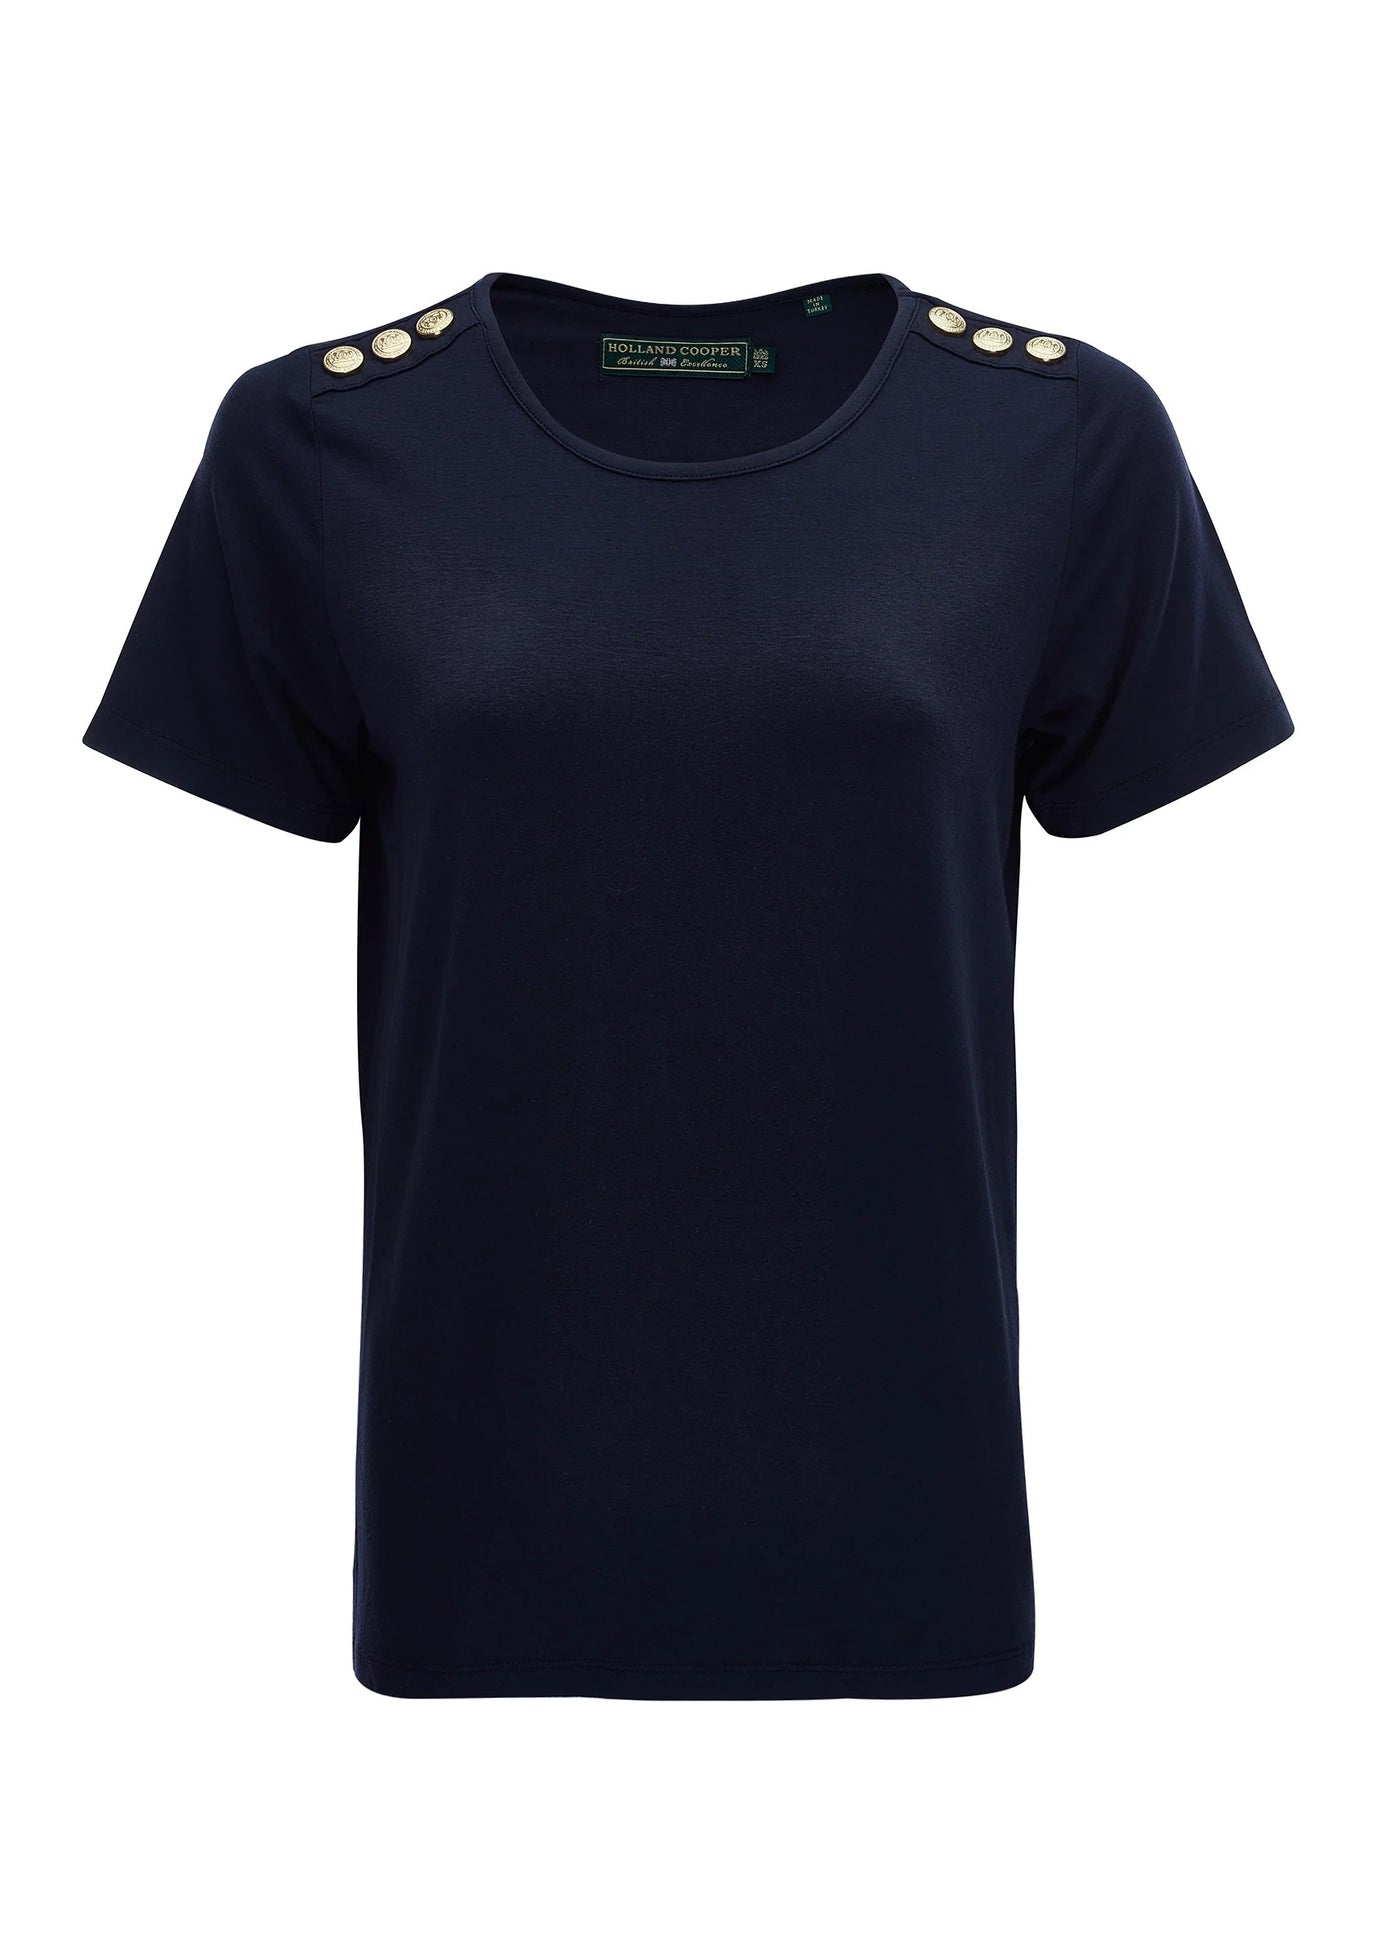 Holland Cooper Relax Fit Crew Neck Tee in Navy Front